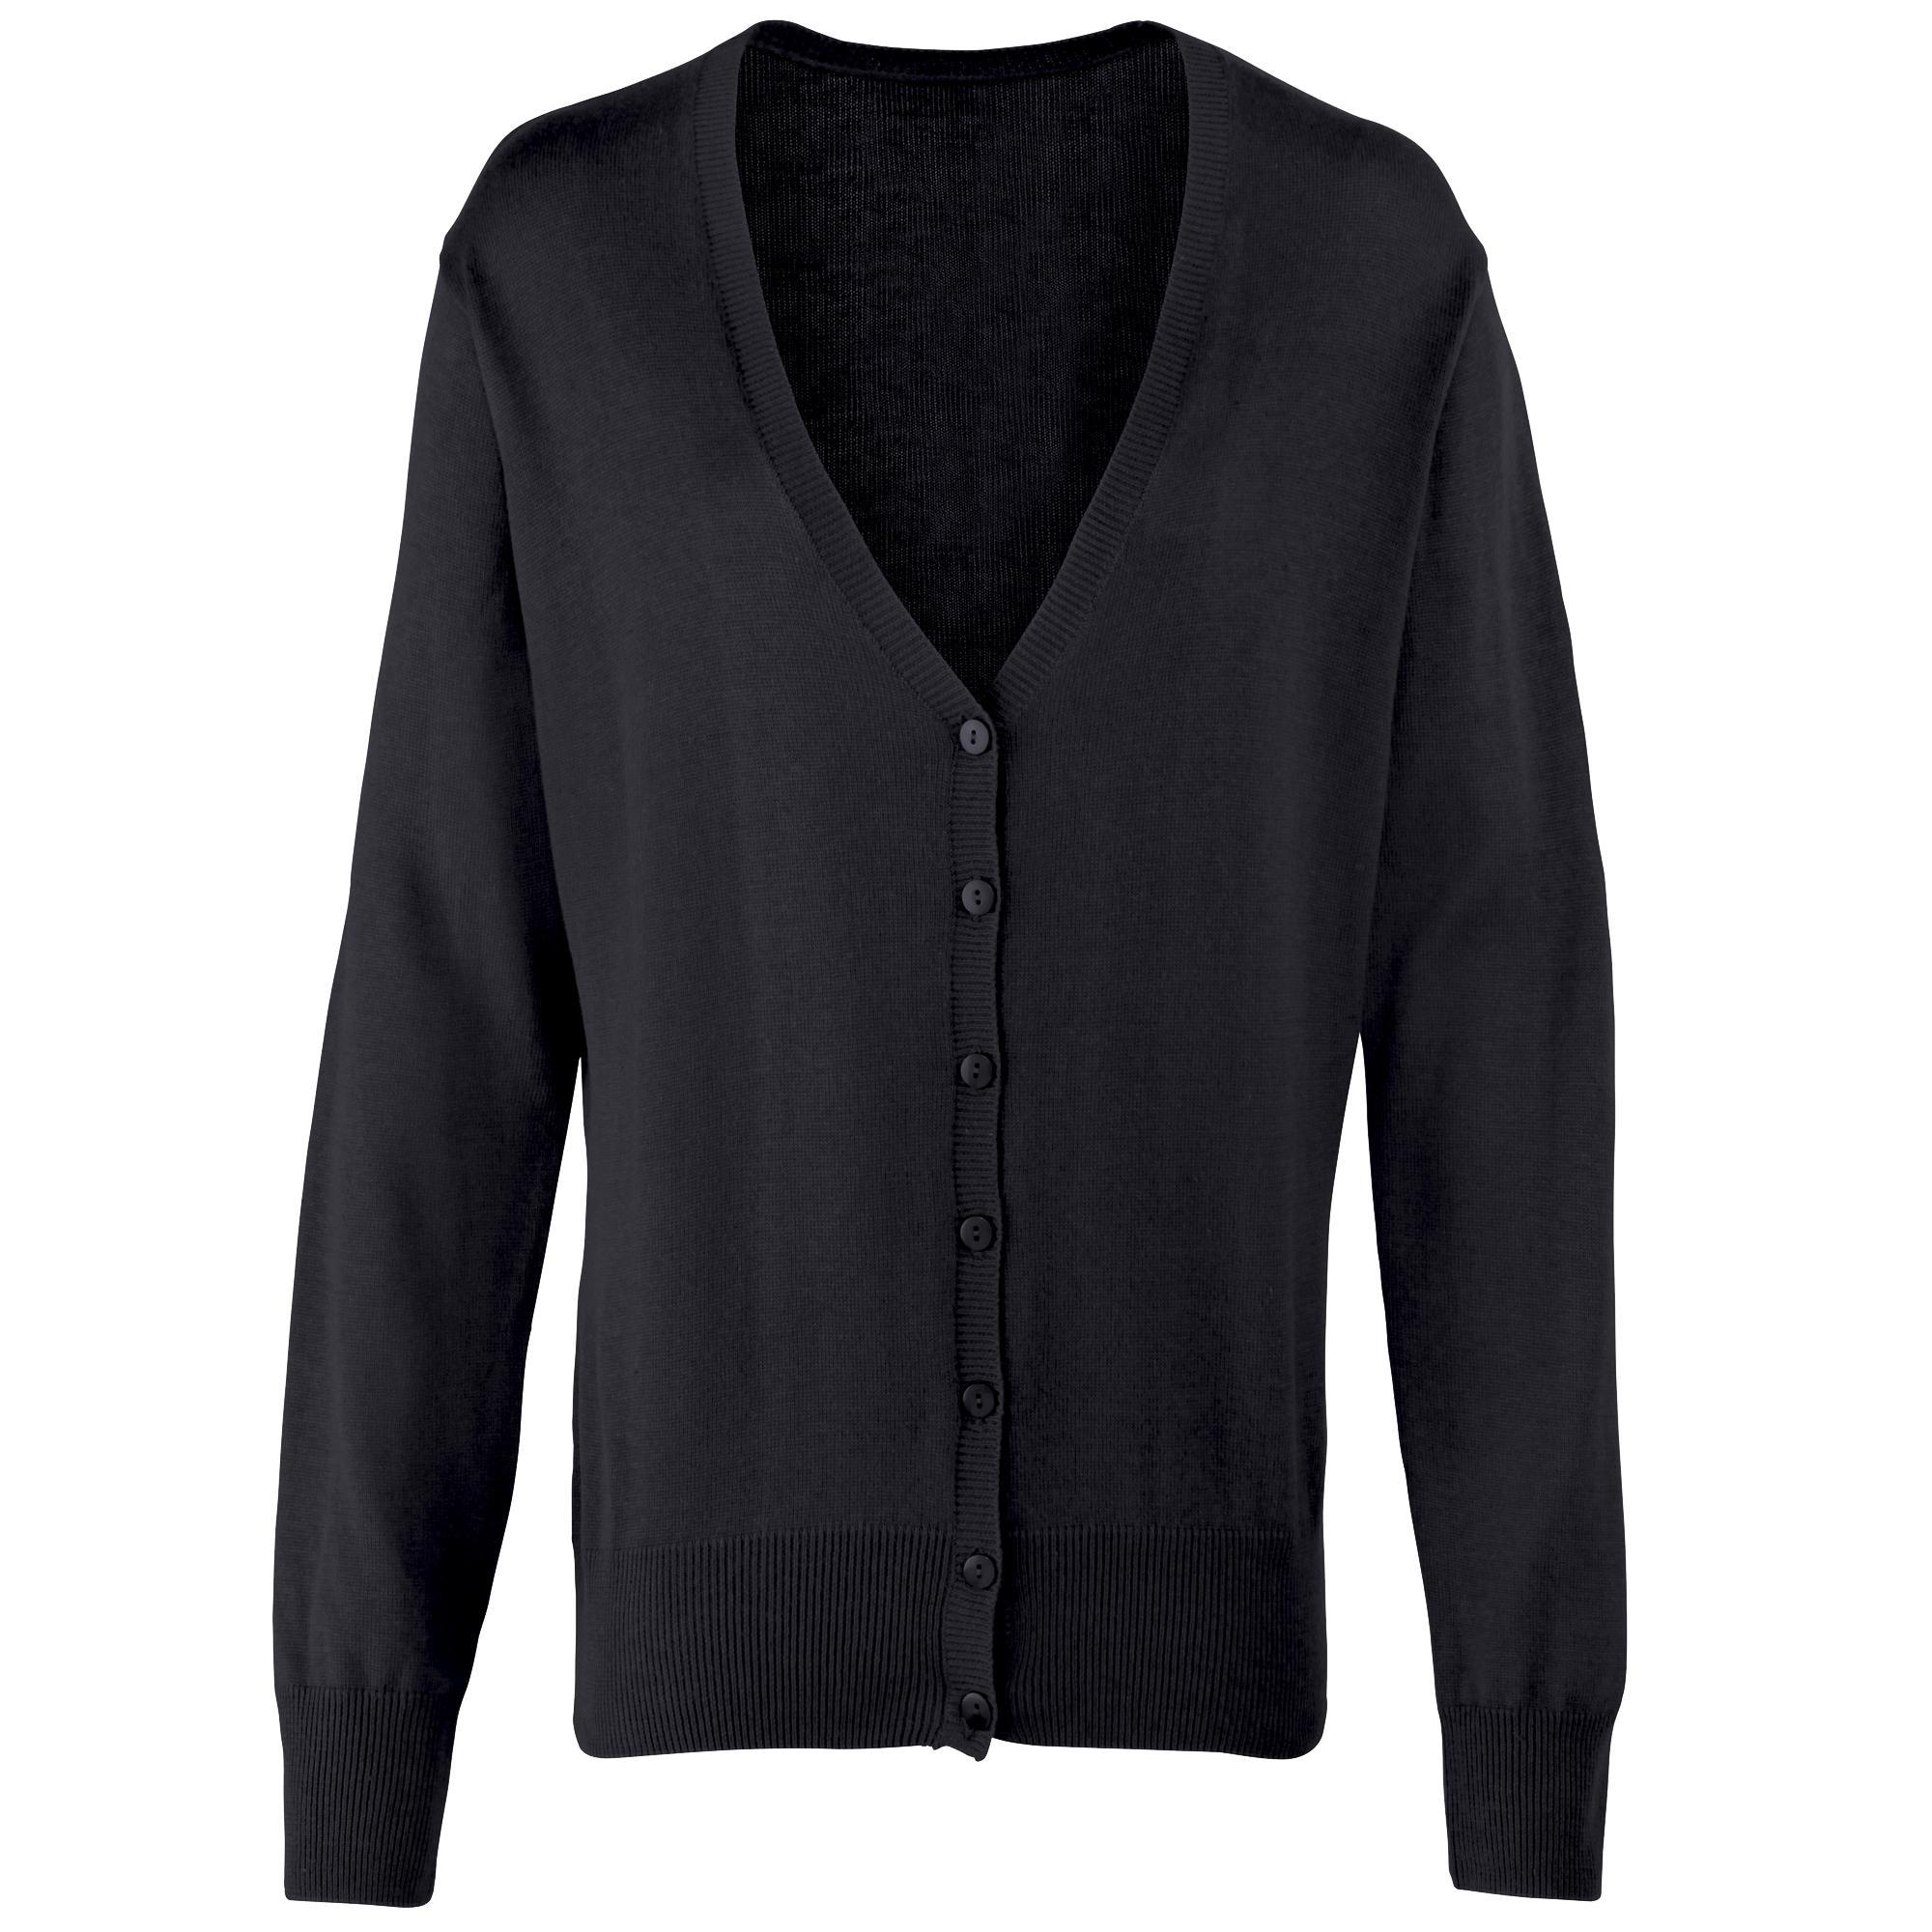 Premier Womens/Ladies Button Through Long Sleeve V-neck Knitted Cardigan (Black) (18)